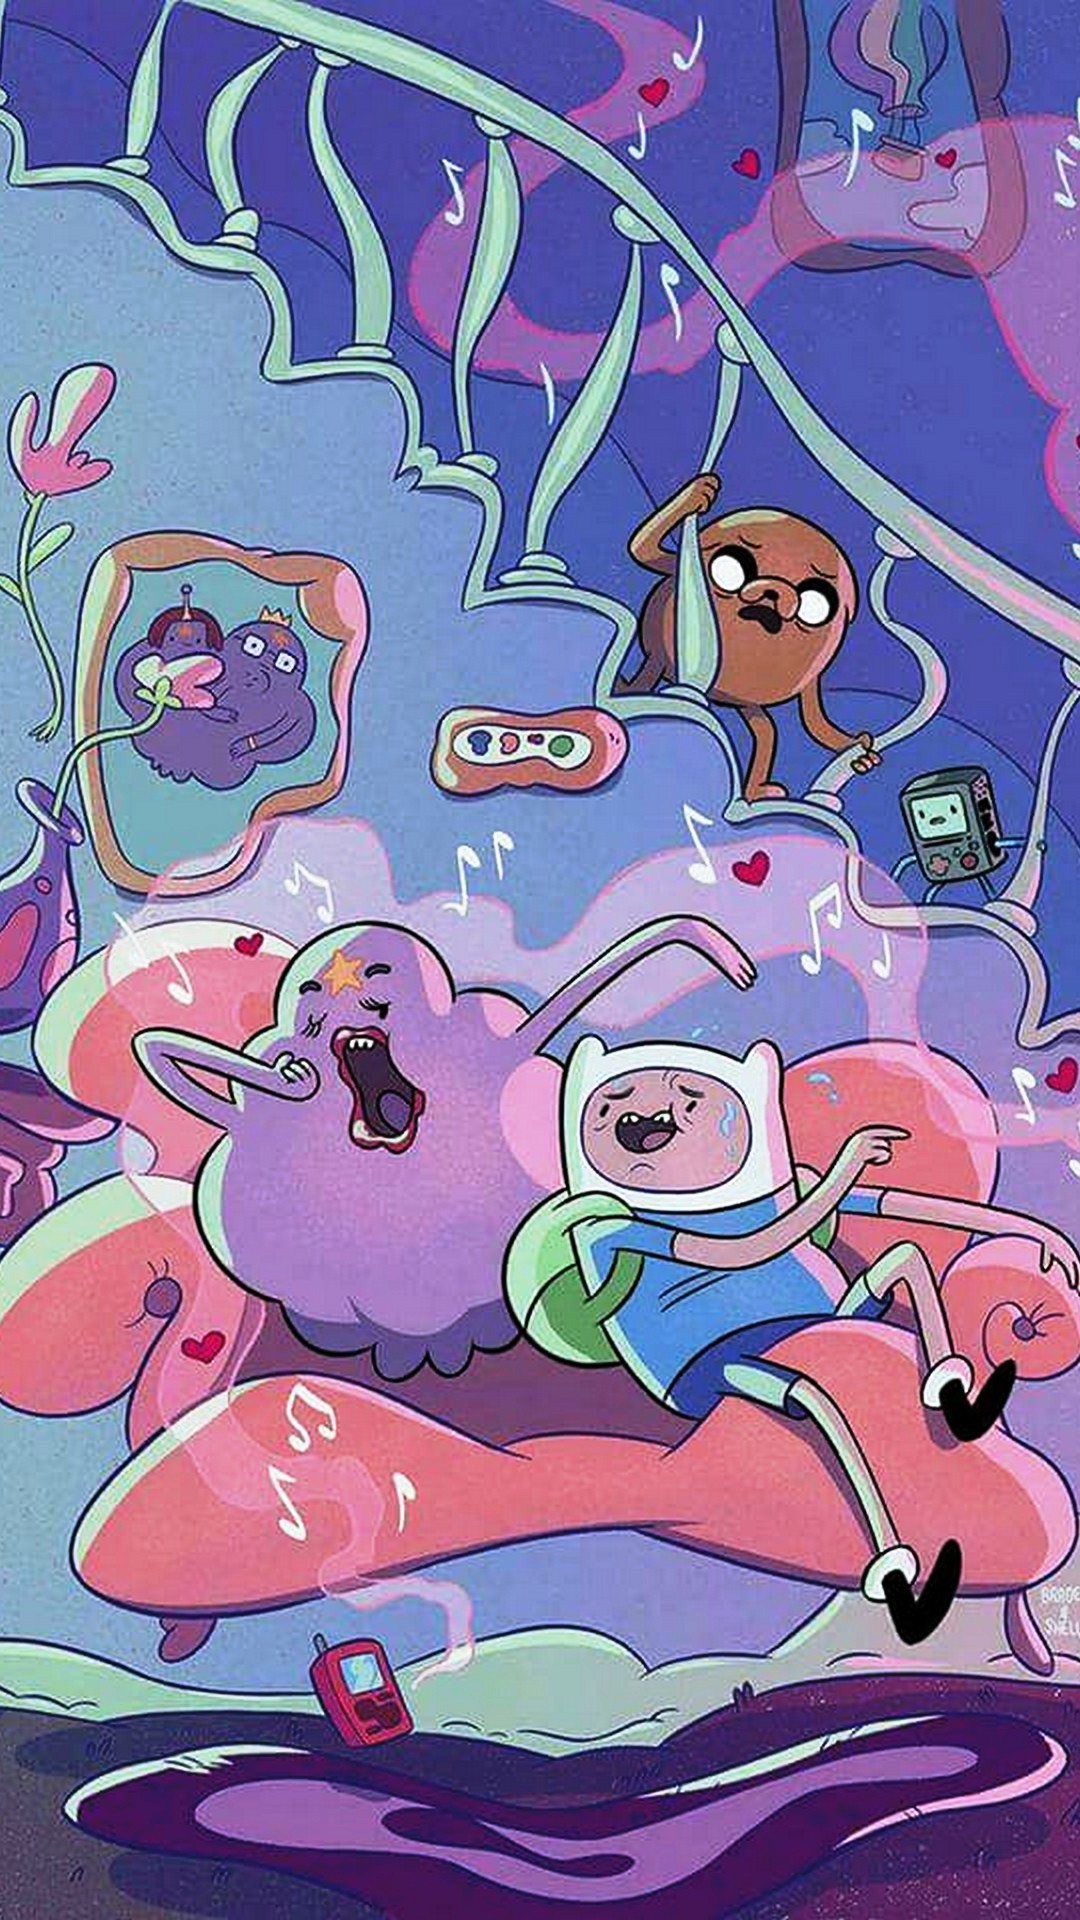 Adventure Time iPhone Wallpaper With high-resolution 1080X1920 pixel. You can use this wallpaper for your iPhone 5, 6, 7, 8, X backgrounds, Mobile Screensaver, or iPad Lock Screen